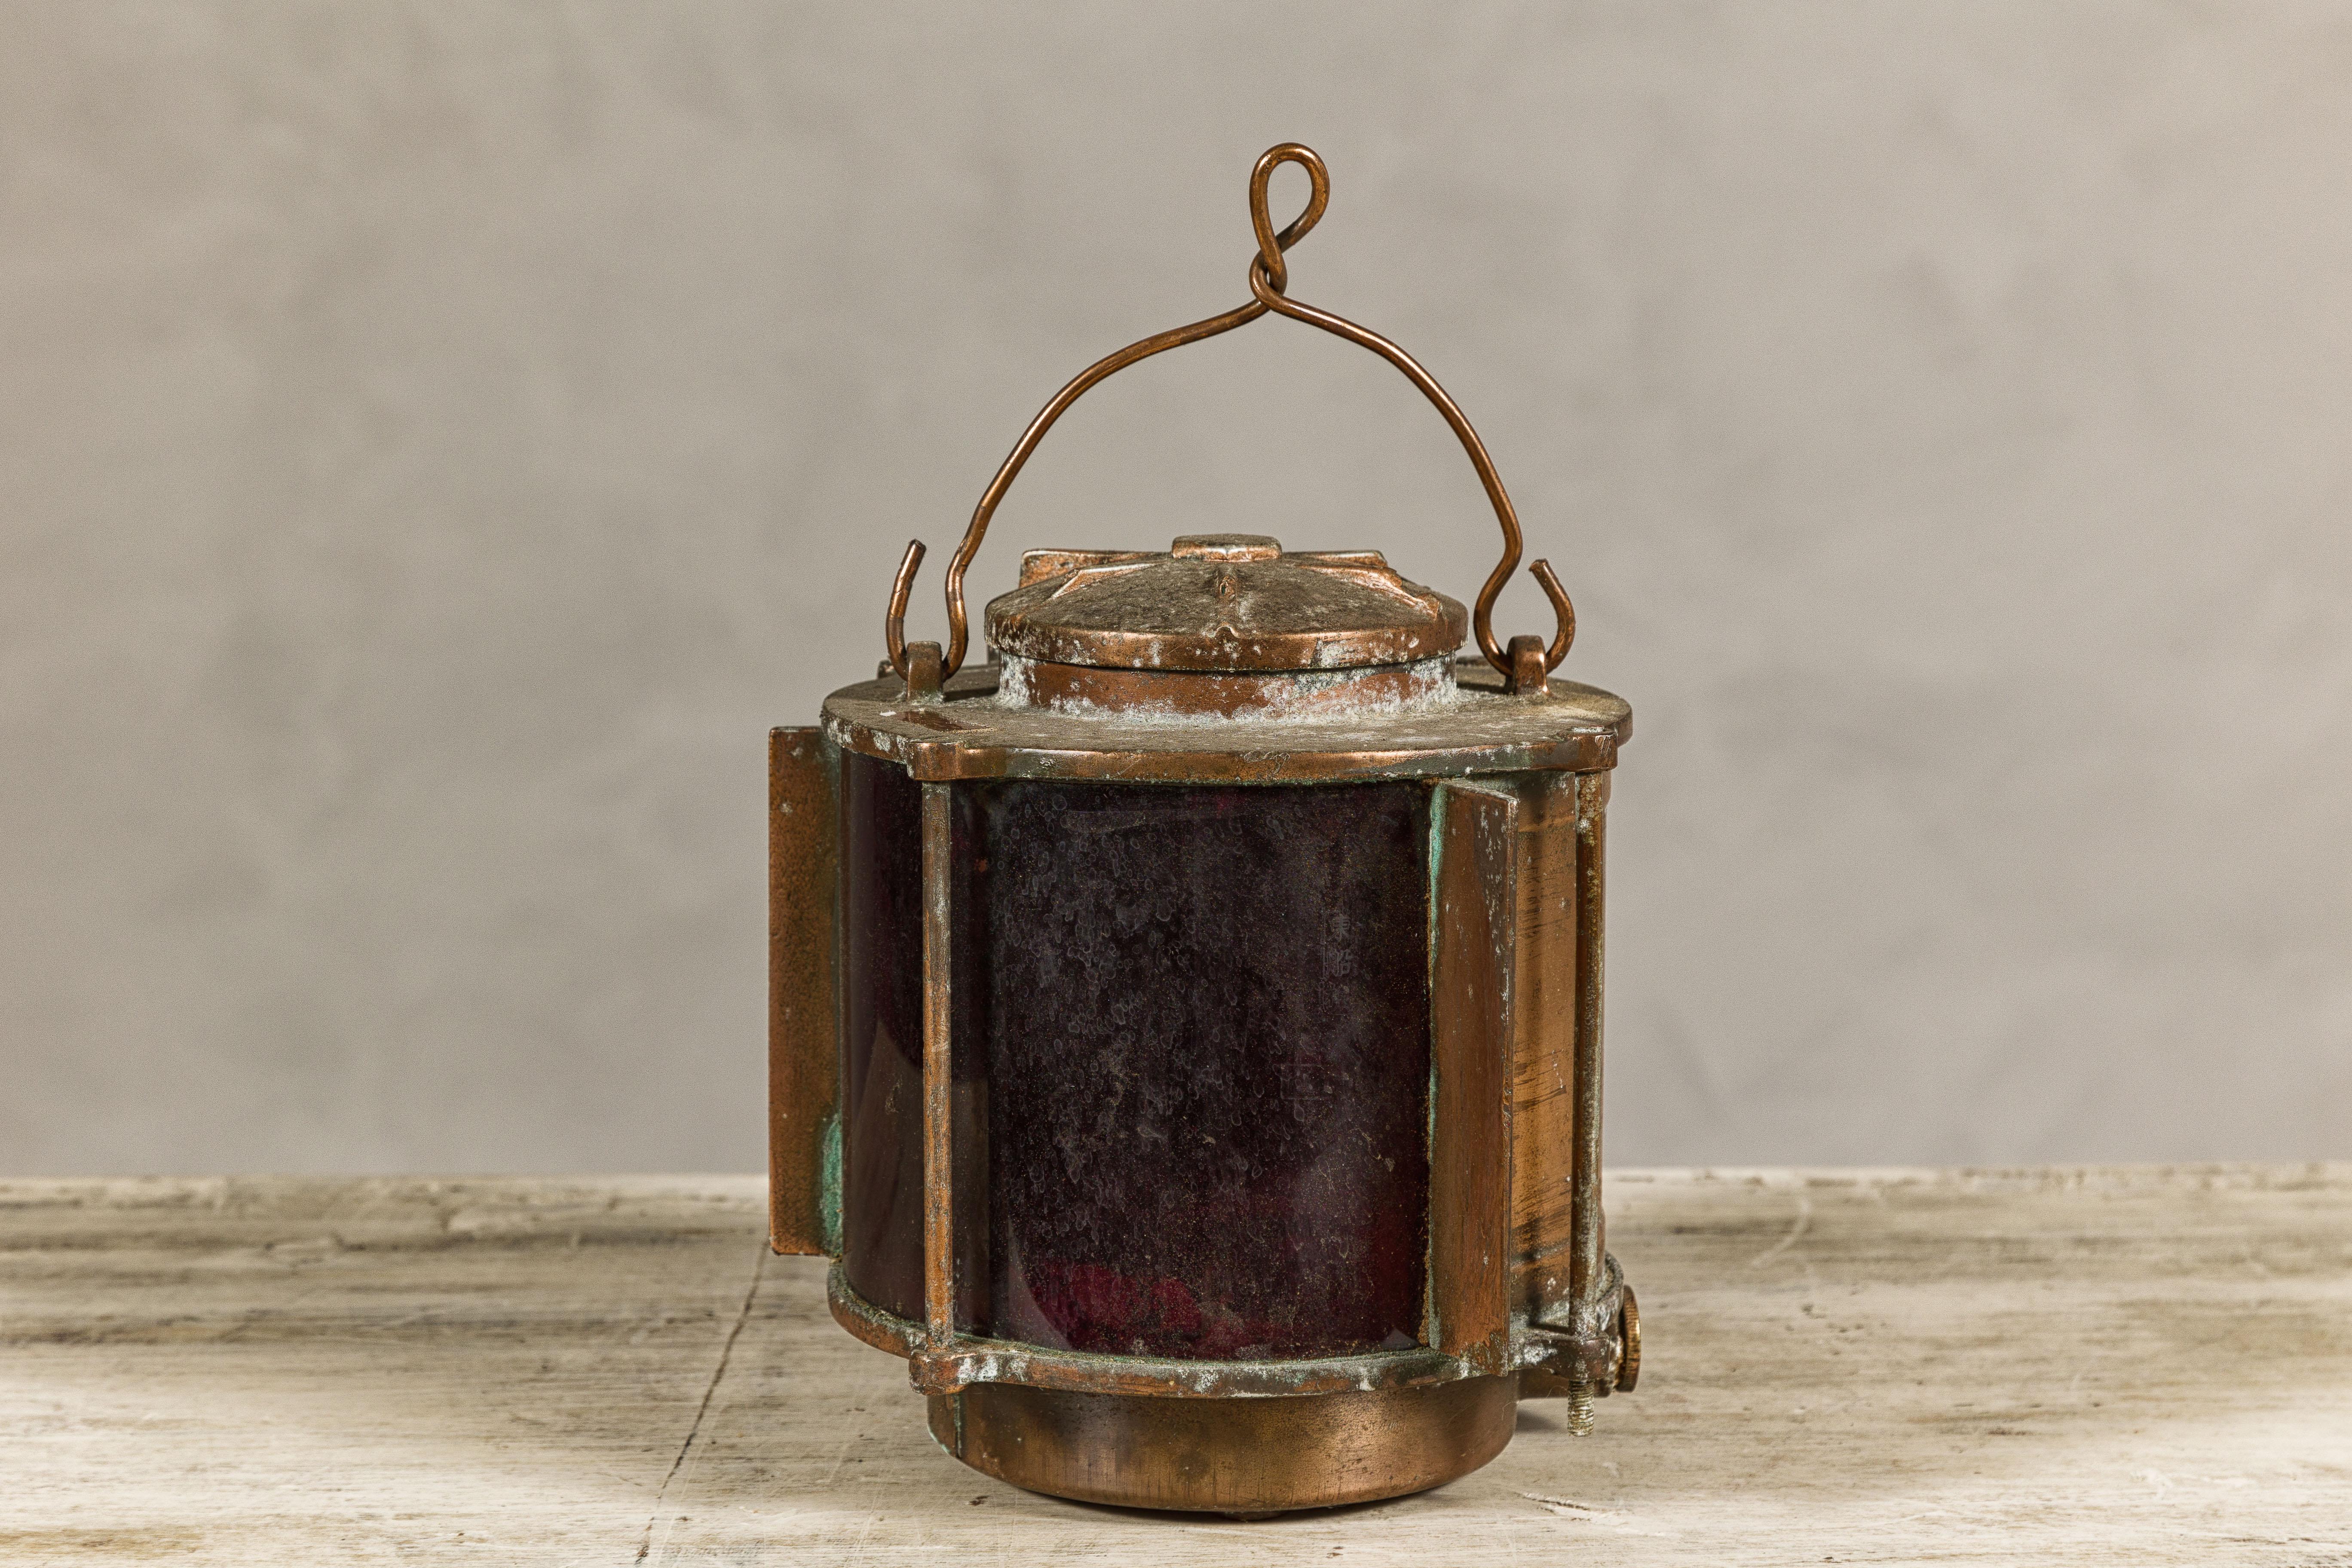 20th Century Vintage Japanese Metal Ship Lantern with Red Glass Panel and Weathered Patina